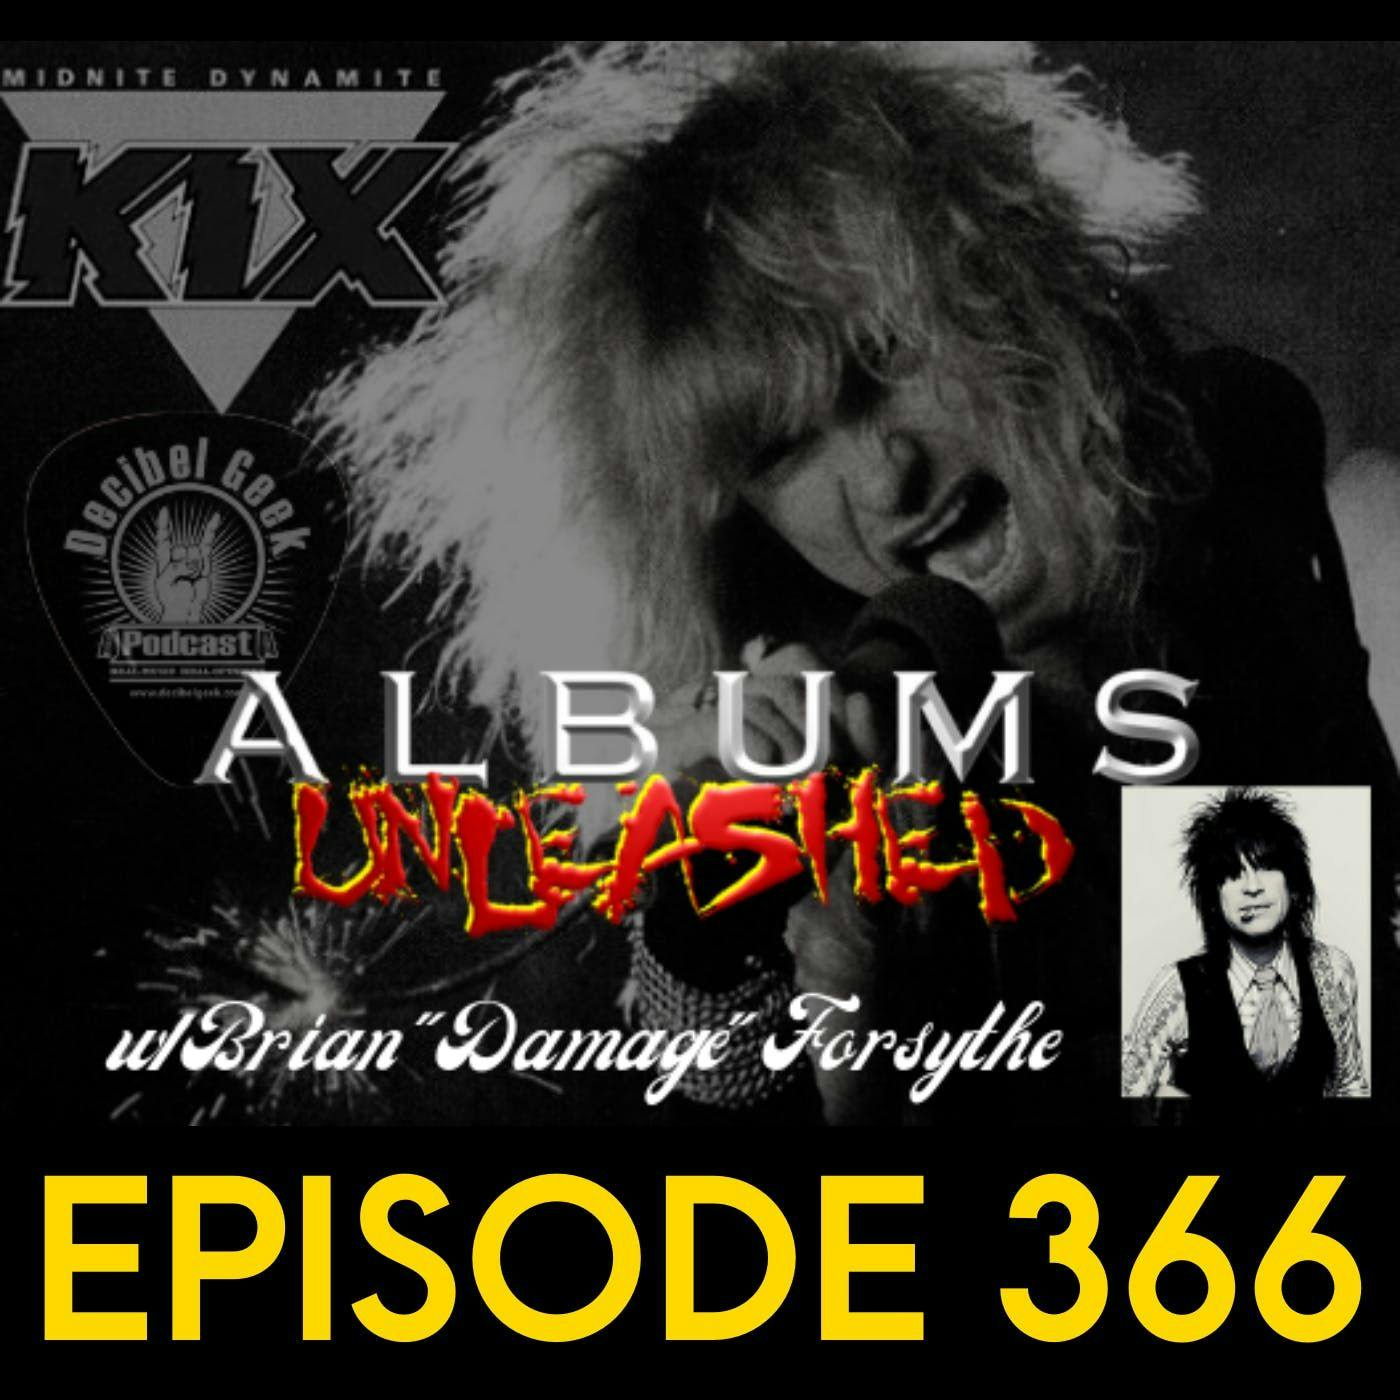 KIX Midnite Dynamite Albums Unleashed with Brian Forsythe - Ep366